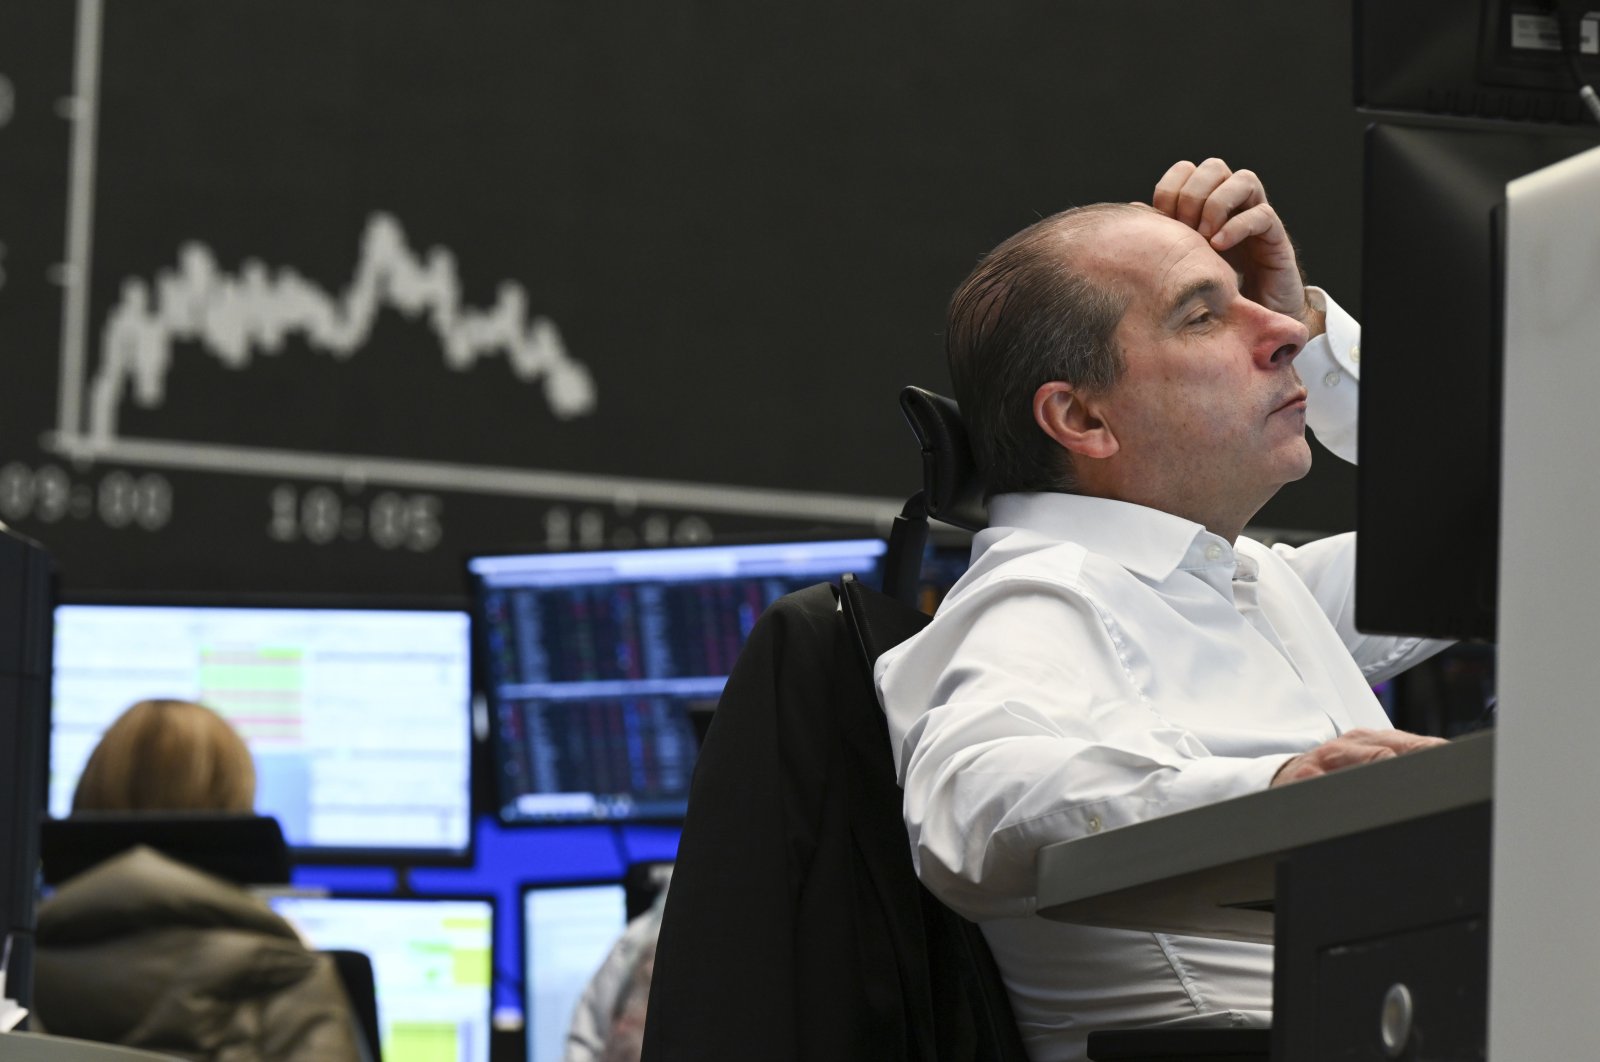 A stock trader watches his monitor on the floor of the Frankfurt Stock Exchange in Frankfurt, Germany, Feb. 24, 2022. (AP Photo)